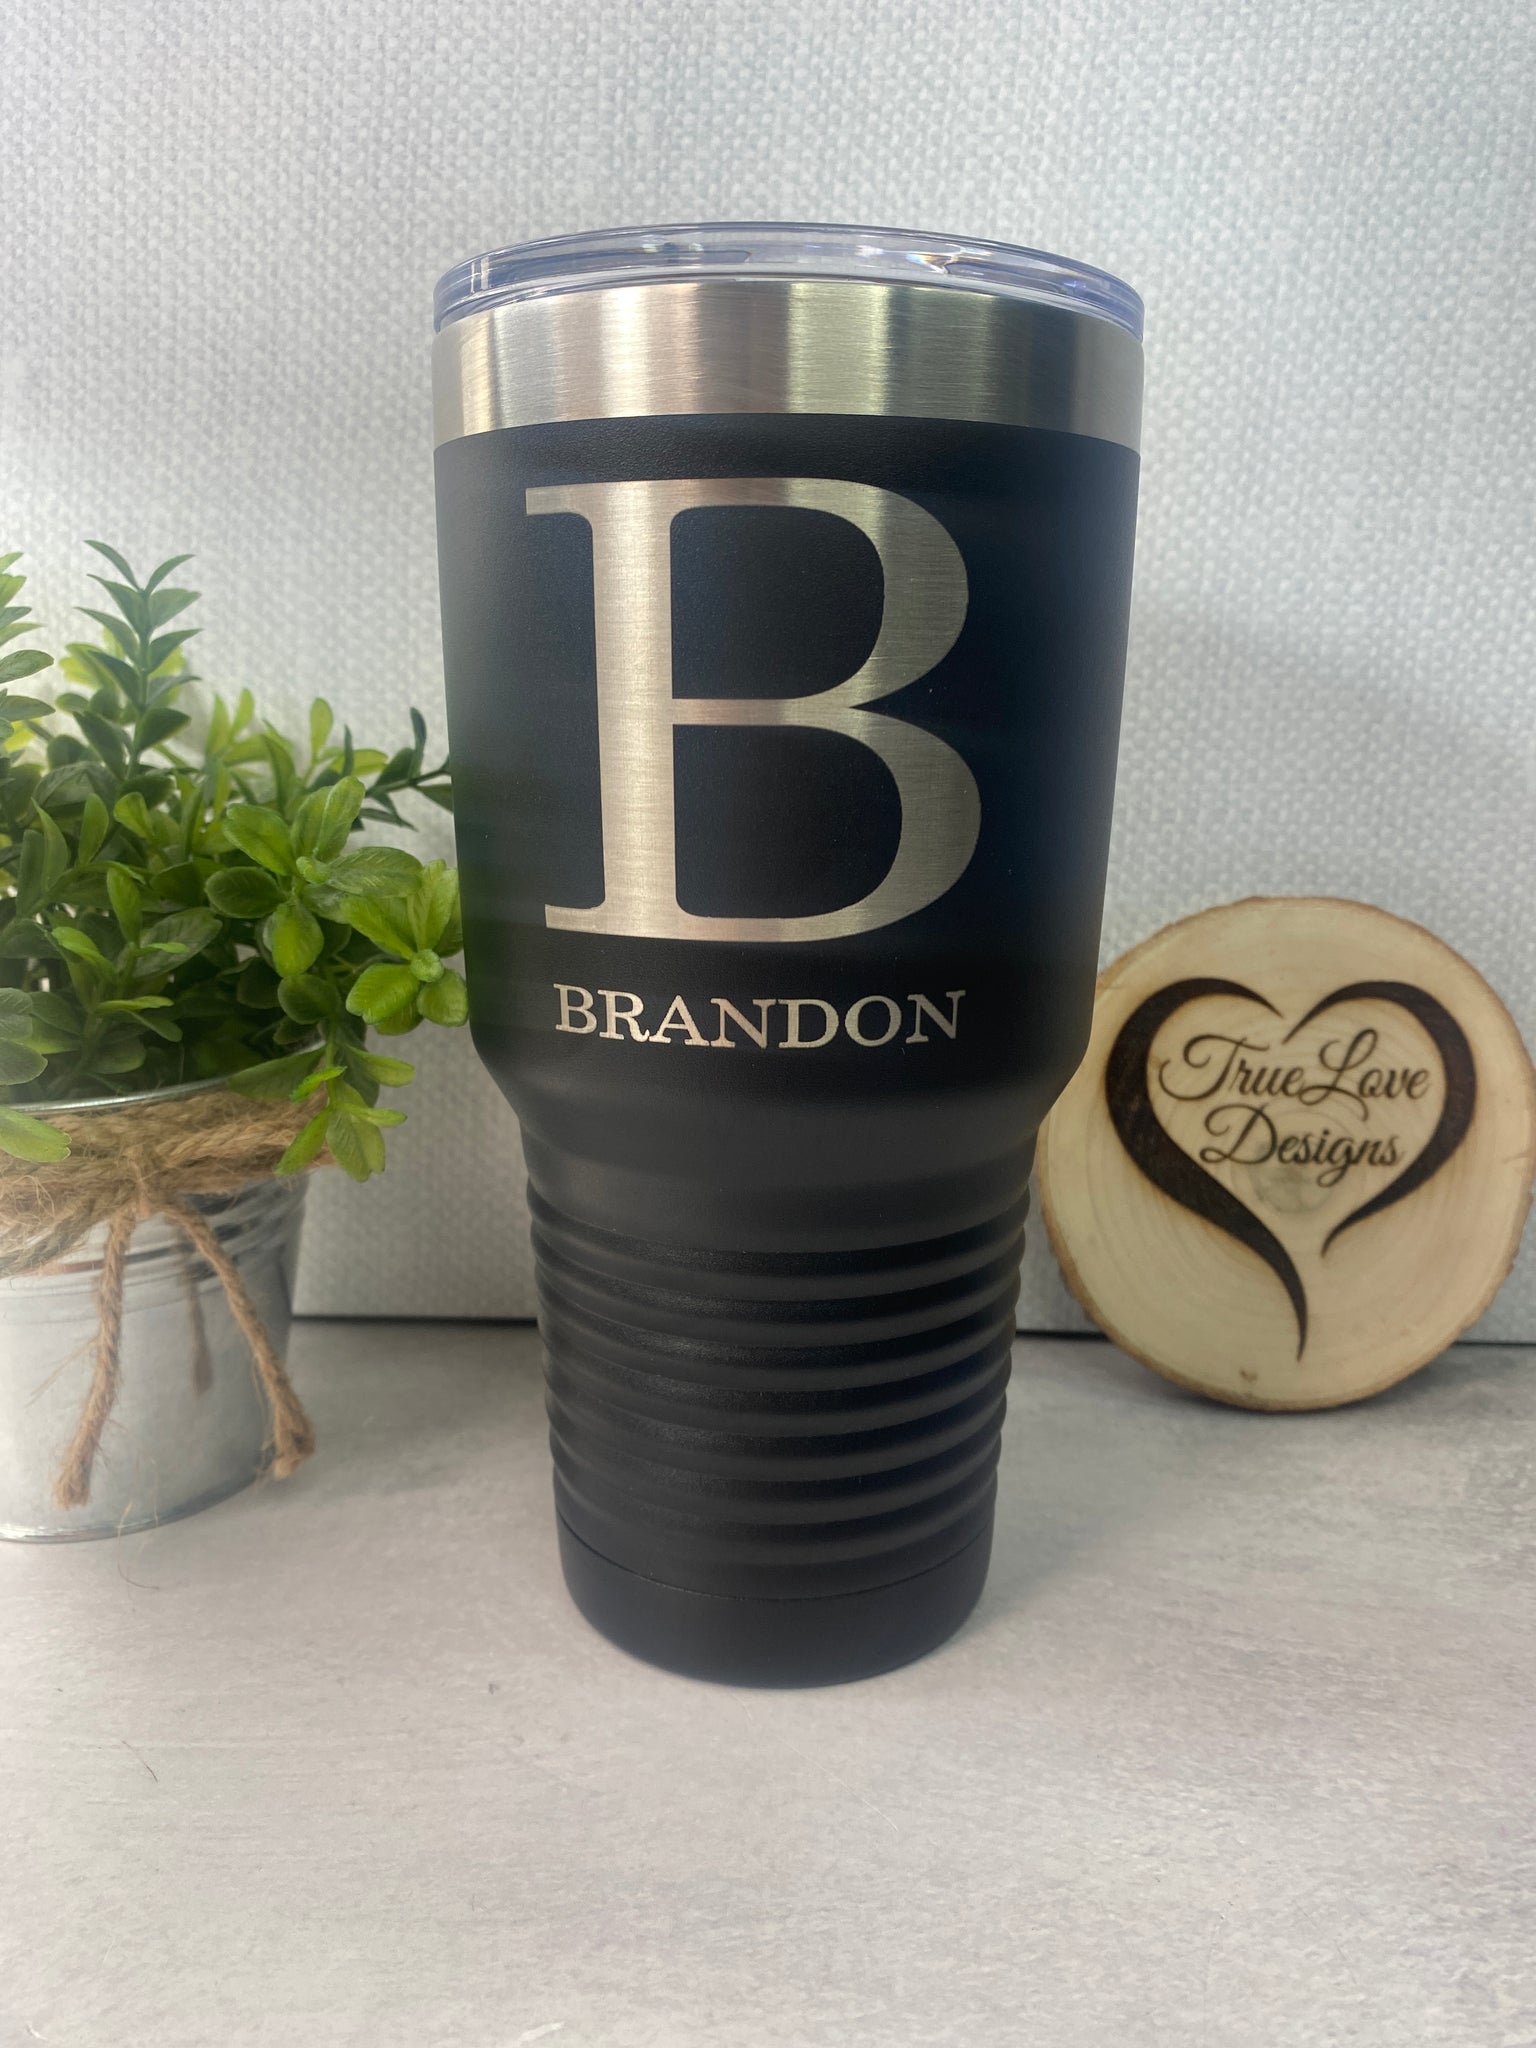 Engraving powder coated cups .. I just engraved a 30 oz tumbler